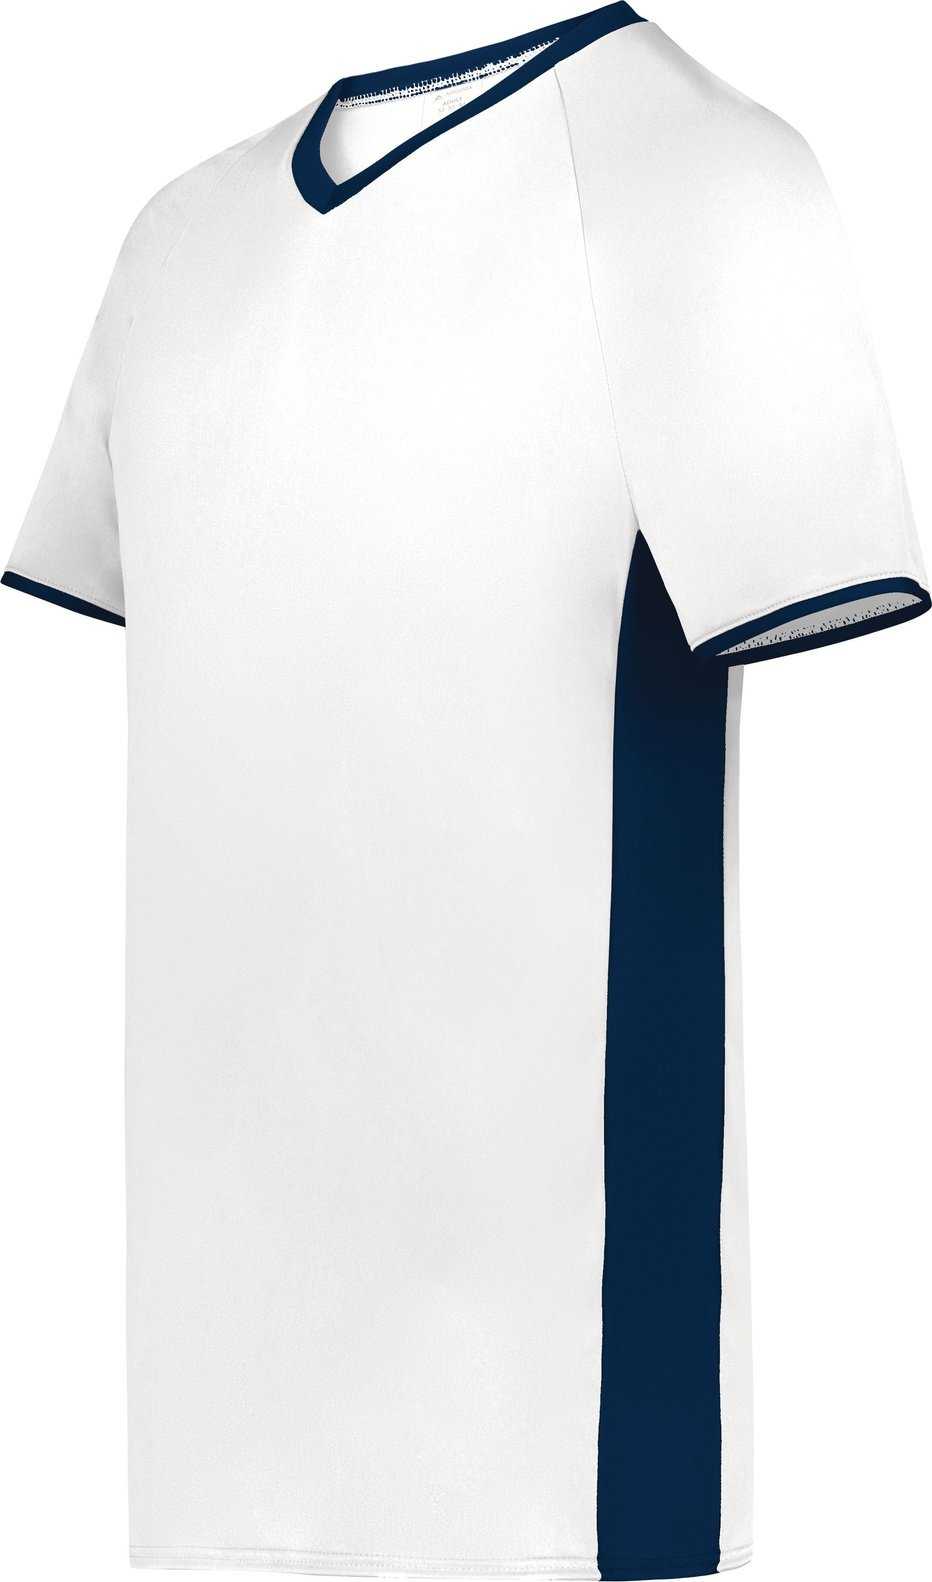 Augusta 6907 Cutter+ V-Neck Jersey - White Navy - HIT a Double